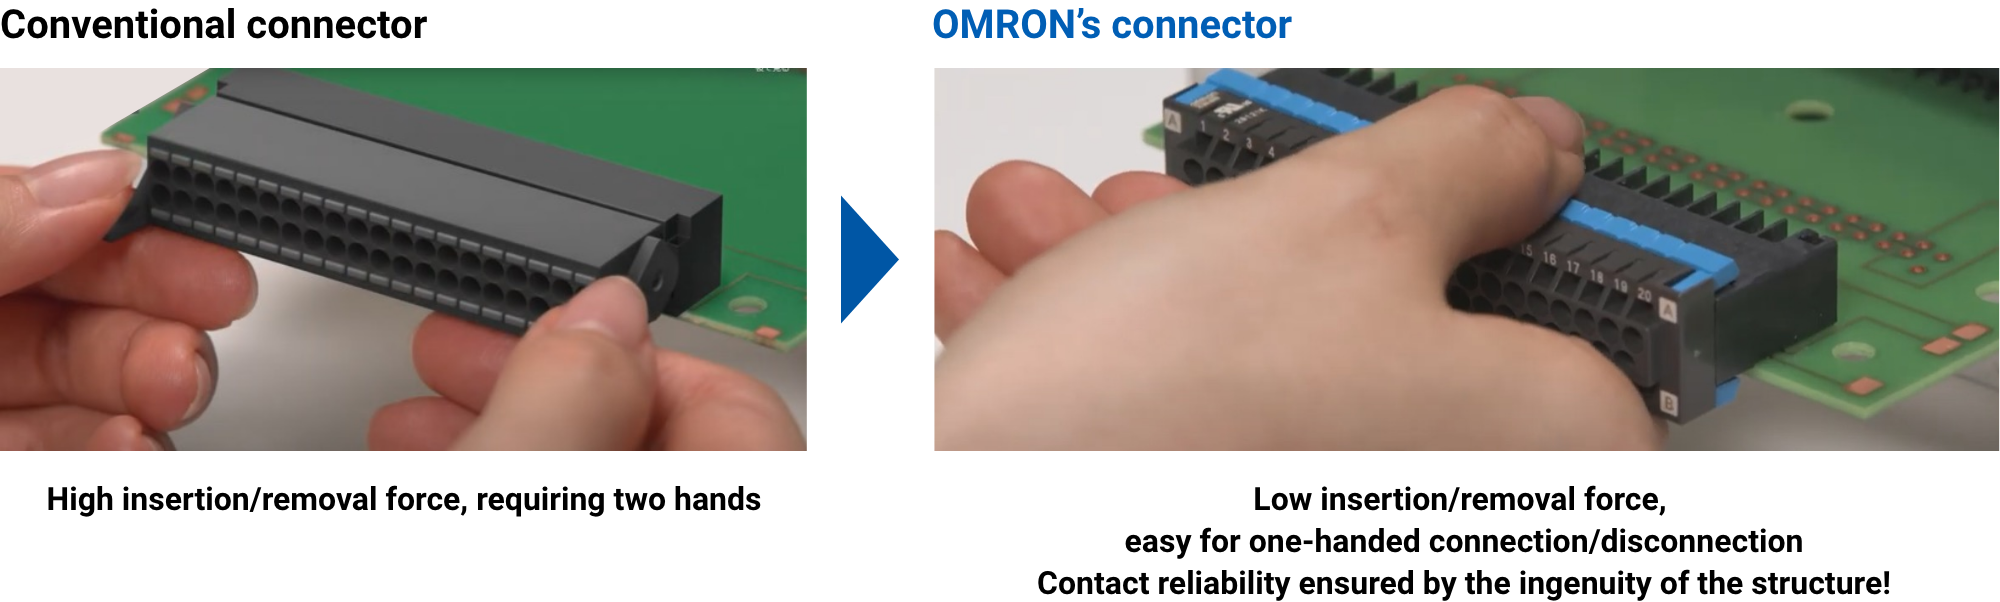 ［Conventional connector］High insertion/removal force, requiring two hands => ［OMRON's connector］Low insertion/removal force, easy for one-handed connection/disconnection. Contact reliability ensured by the ingenuity of the structure!